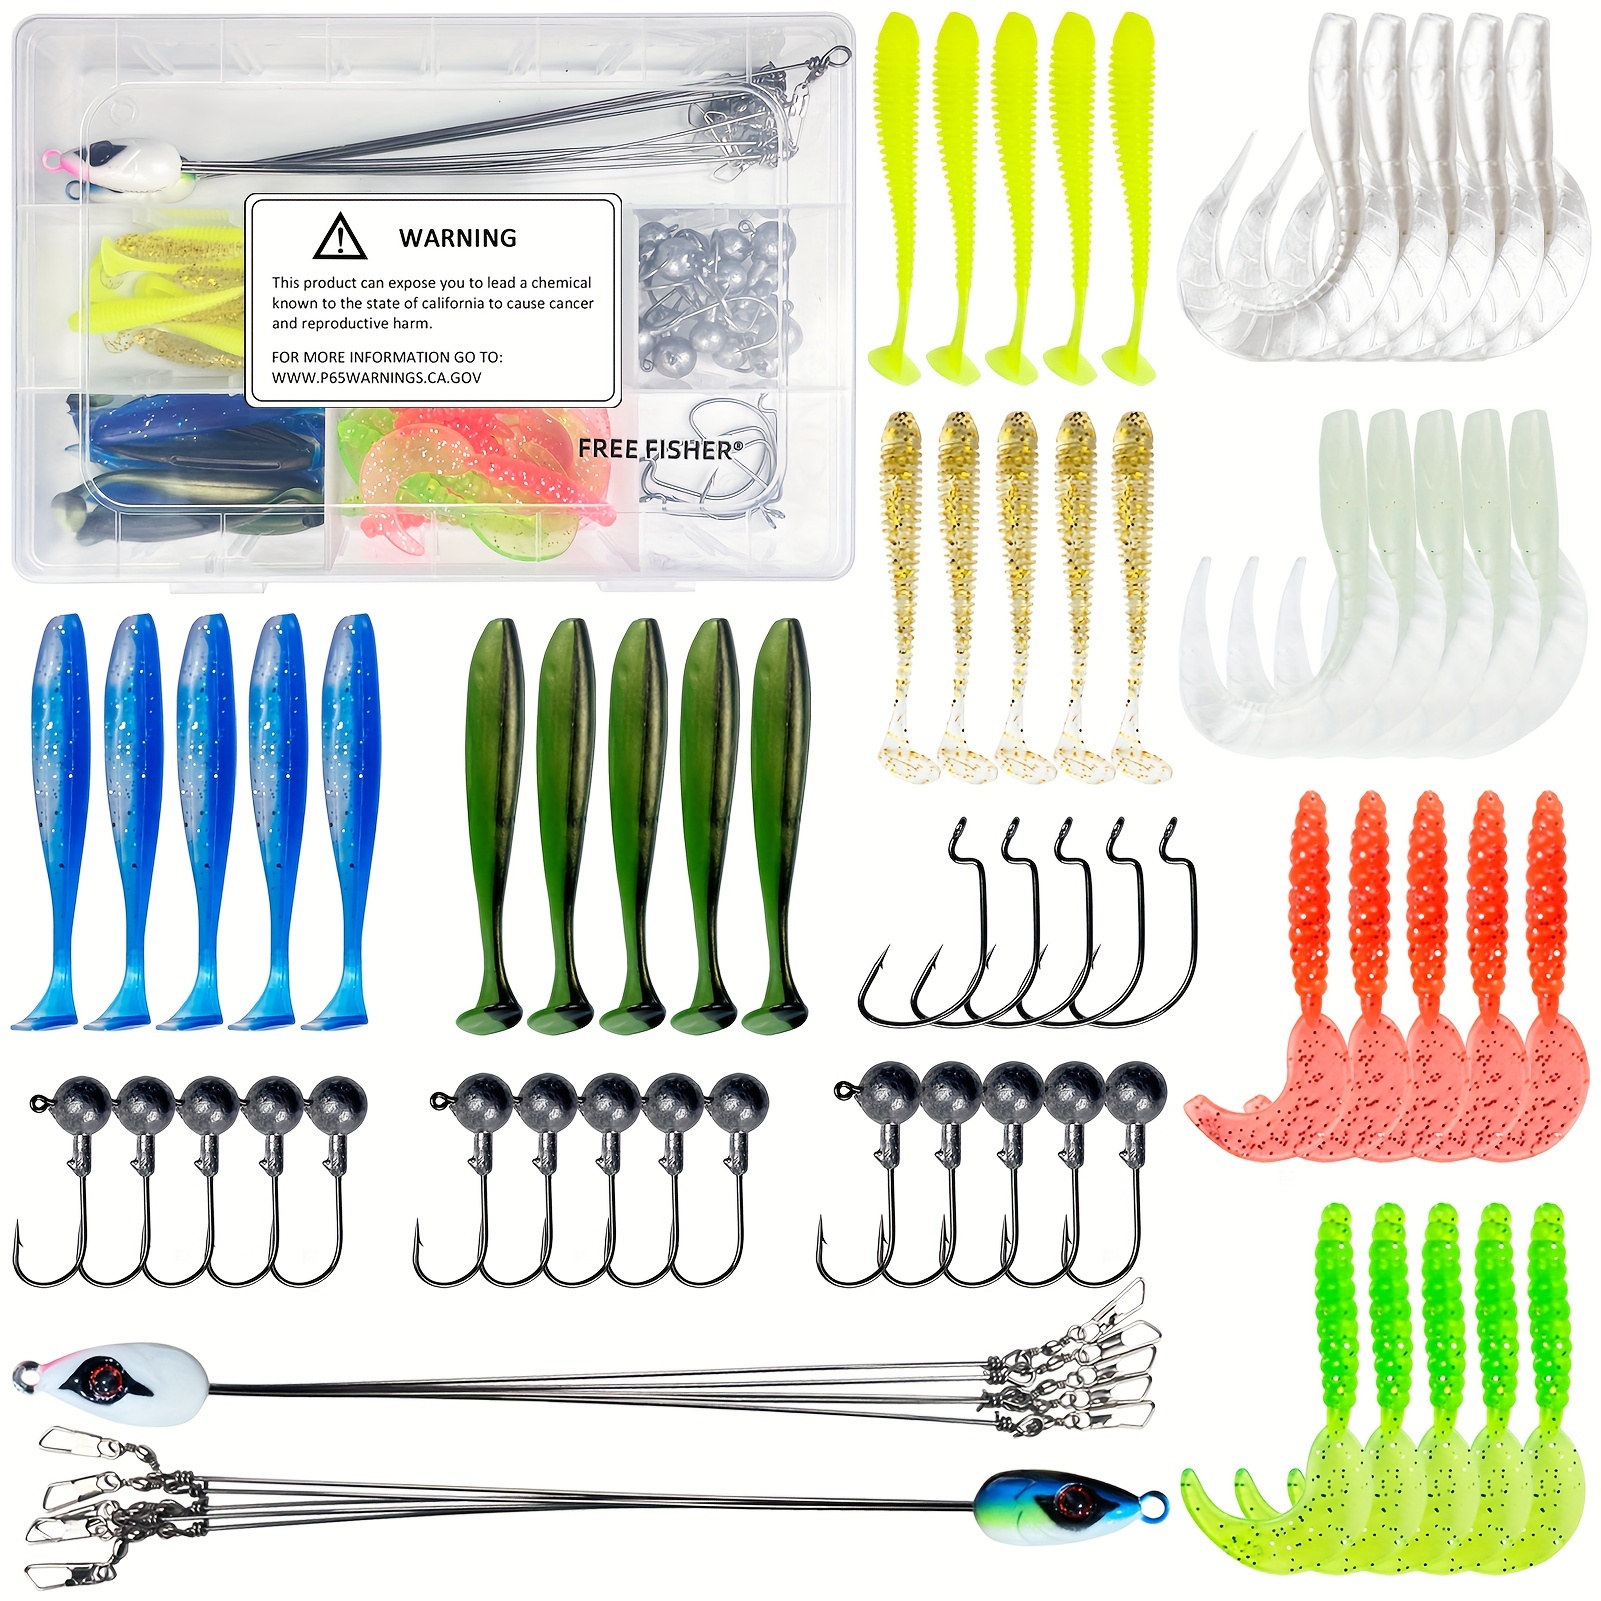 

Rig Umbrella For Bass Fishing 3 Arms Swim Baits Lures Fishing Jig Head Hooks Swimbait Paddle Tail Soft Lures Set For Freshwater Trout Salmon 63 Pcs